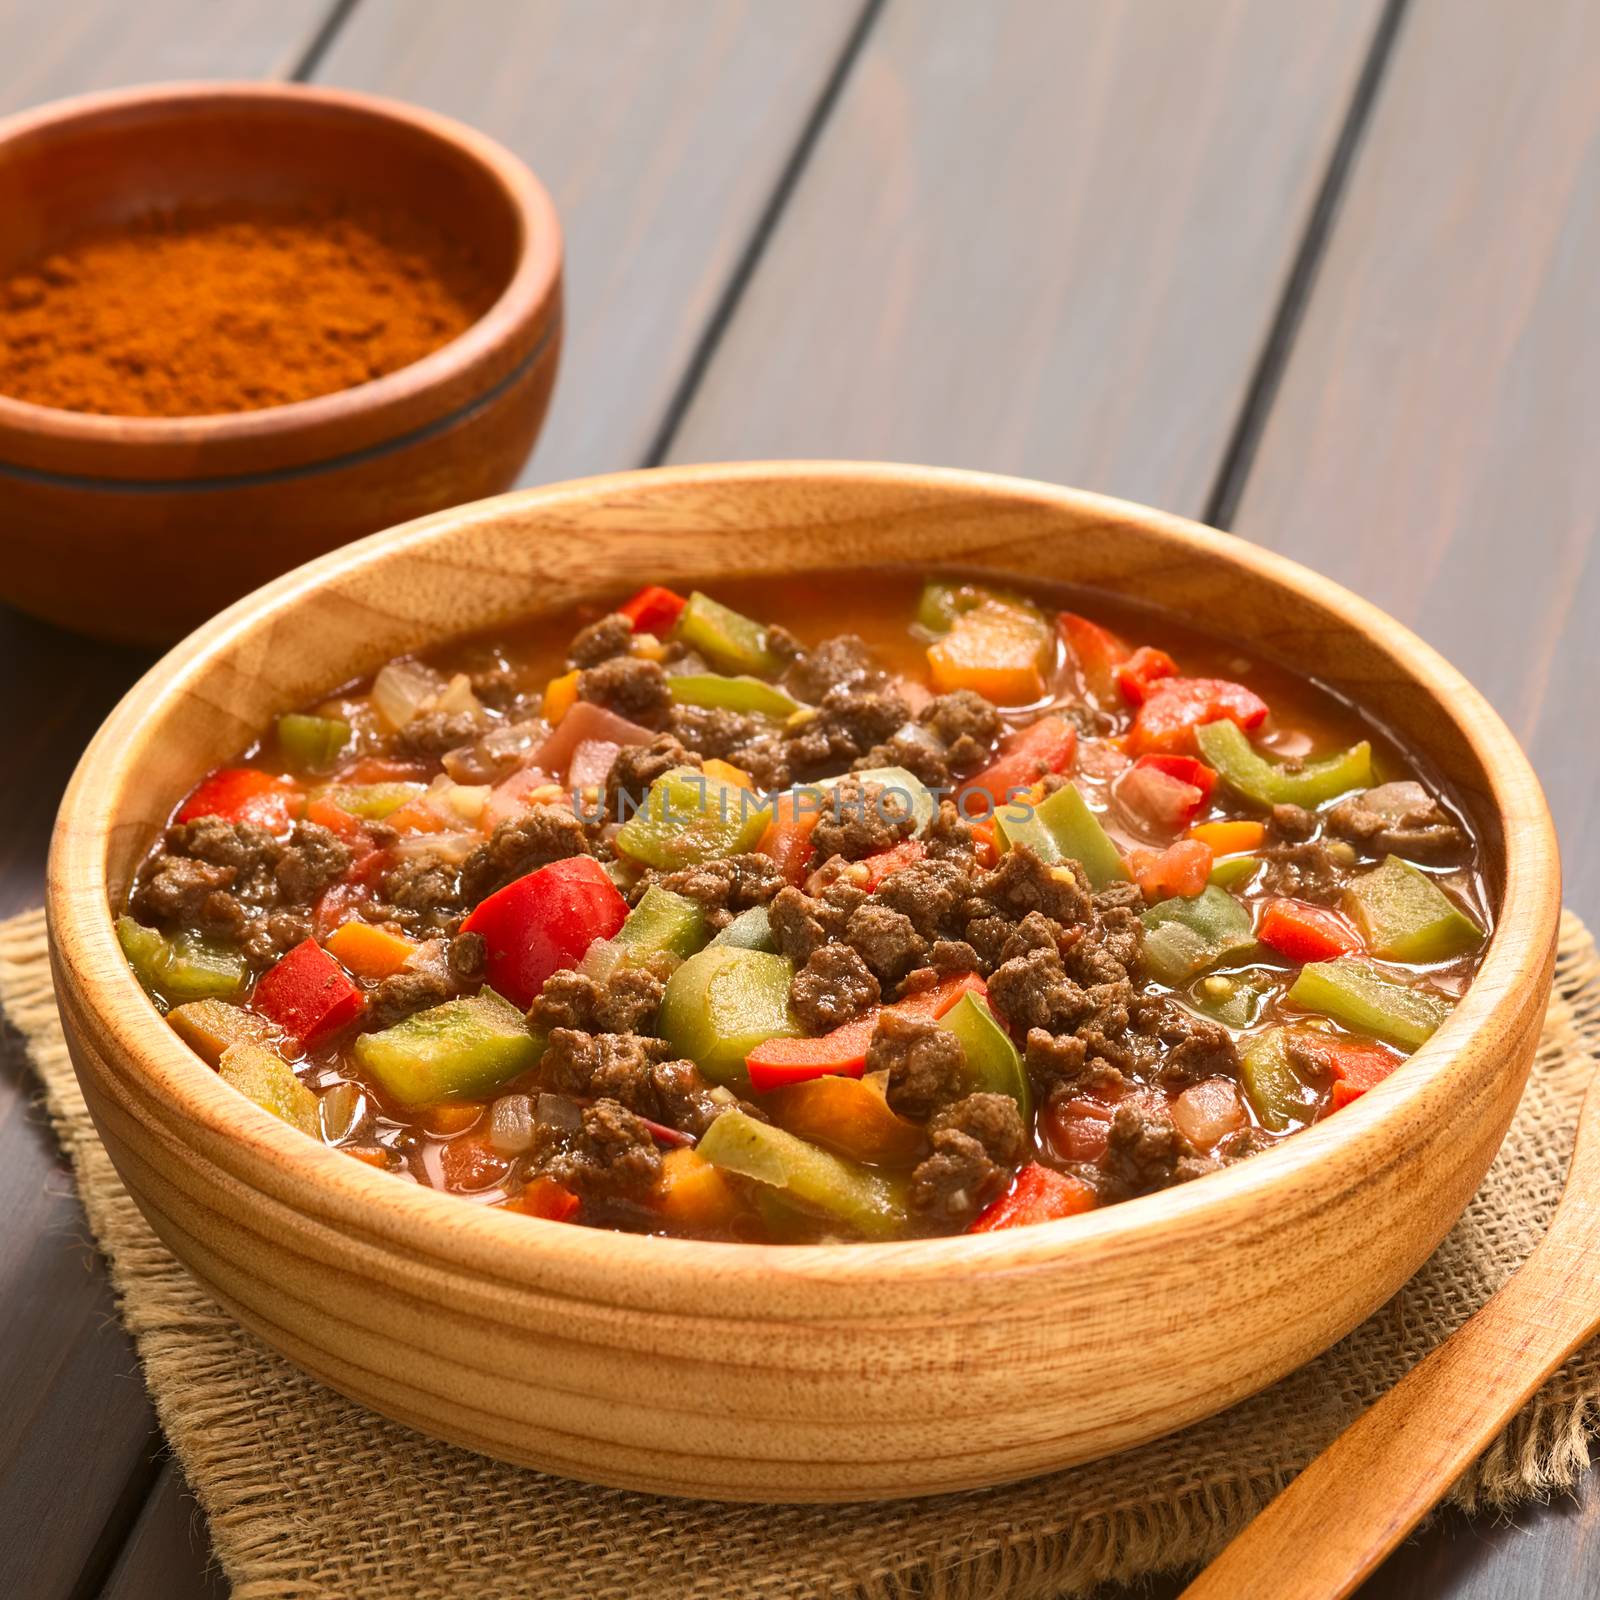 Vegan goulash made of soy meat (textured vegetable protein), capsicum, tomato and onion, served in wooden bowl, paprika powder in the back, photographed with natural light (Selective Focus, Focus one third into the dish)